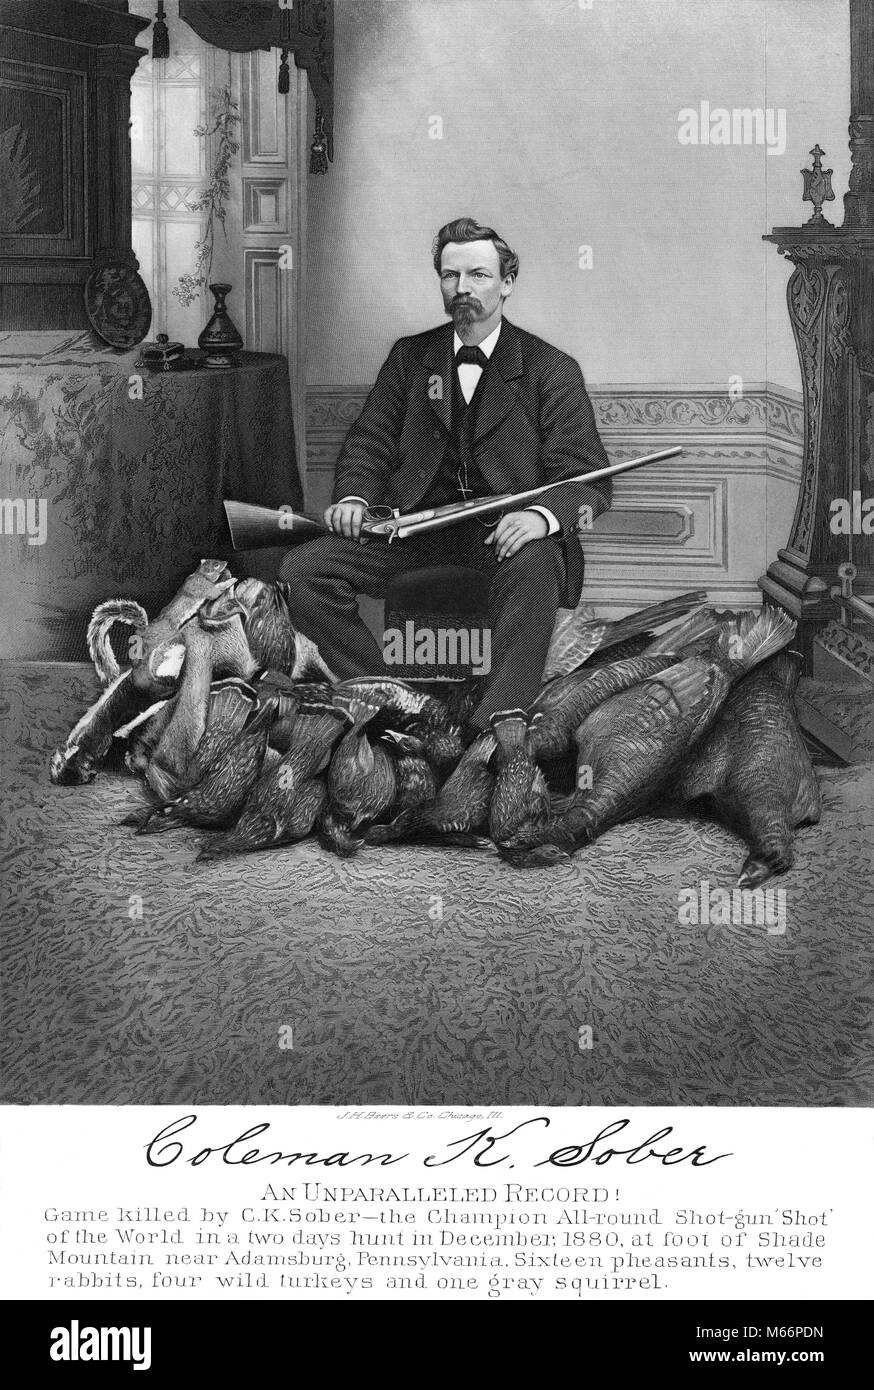 1880s COLEMAN K SOBER CHAMPION HUNTER POSED LOOKING AT CAMERA WITH PARKER SHOTGUN AND HARVEST OF PHEASANTS TURKEYS AND RABBITS - q74798 CPC001 HARS 1880s SHOOTER FIREARM FIREARMS GROUP OF ANIMALS MALES MID-ADULT MID-ADULT MAN POSED SHARPSHOOTER B&W BLACK AND WHITE CAUCASIAN ETHNICITY CHESTNUT TREES COLEMAN COLEMAN K. SOBER CRACK SHOT ENVIRONMENTALIST EXCESSIVE EXHIBITION SHOOTER K. KILL LOOKING AT CAMERA MARKSMAN OCCUPATIONS OLD FASHIONED PERSONS SOBER TIMBER MERCHANT WILD TURKEY Stock Photo